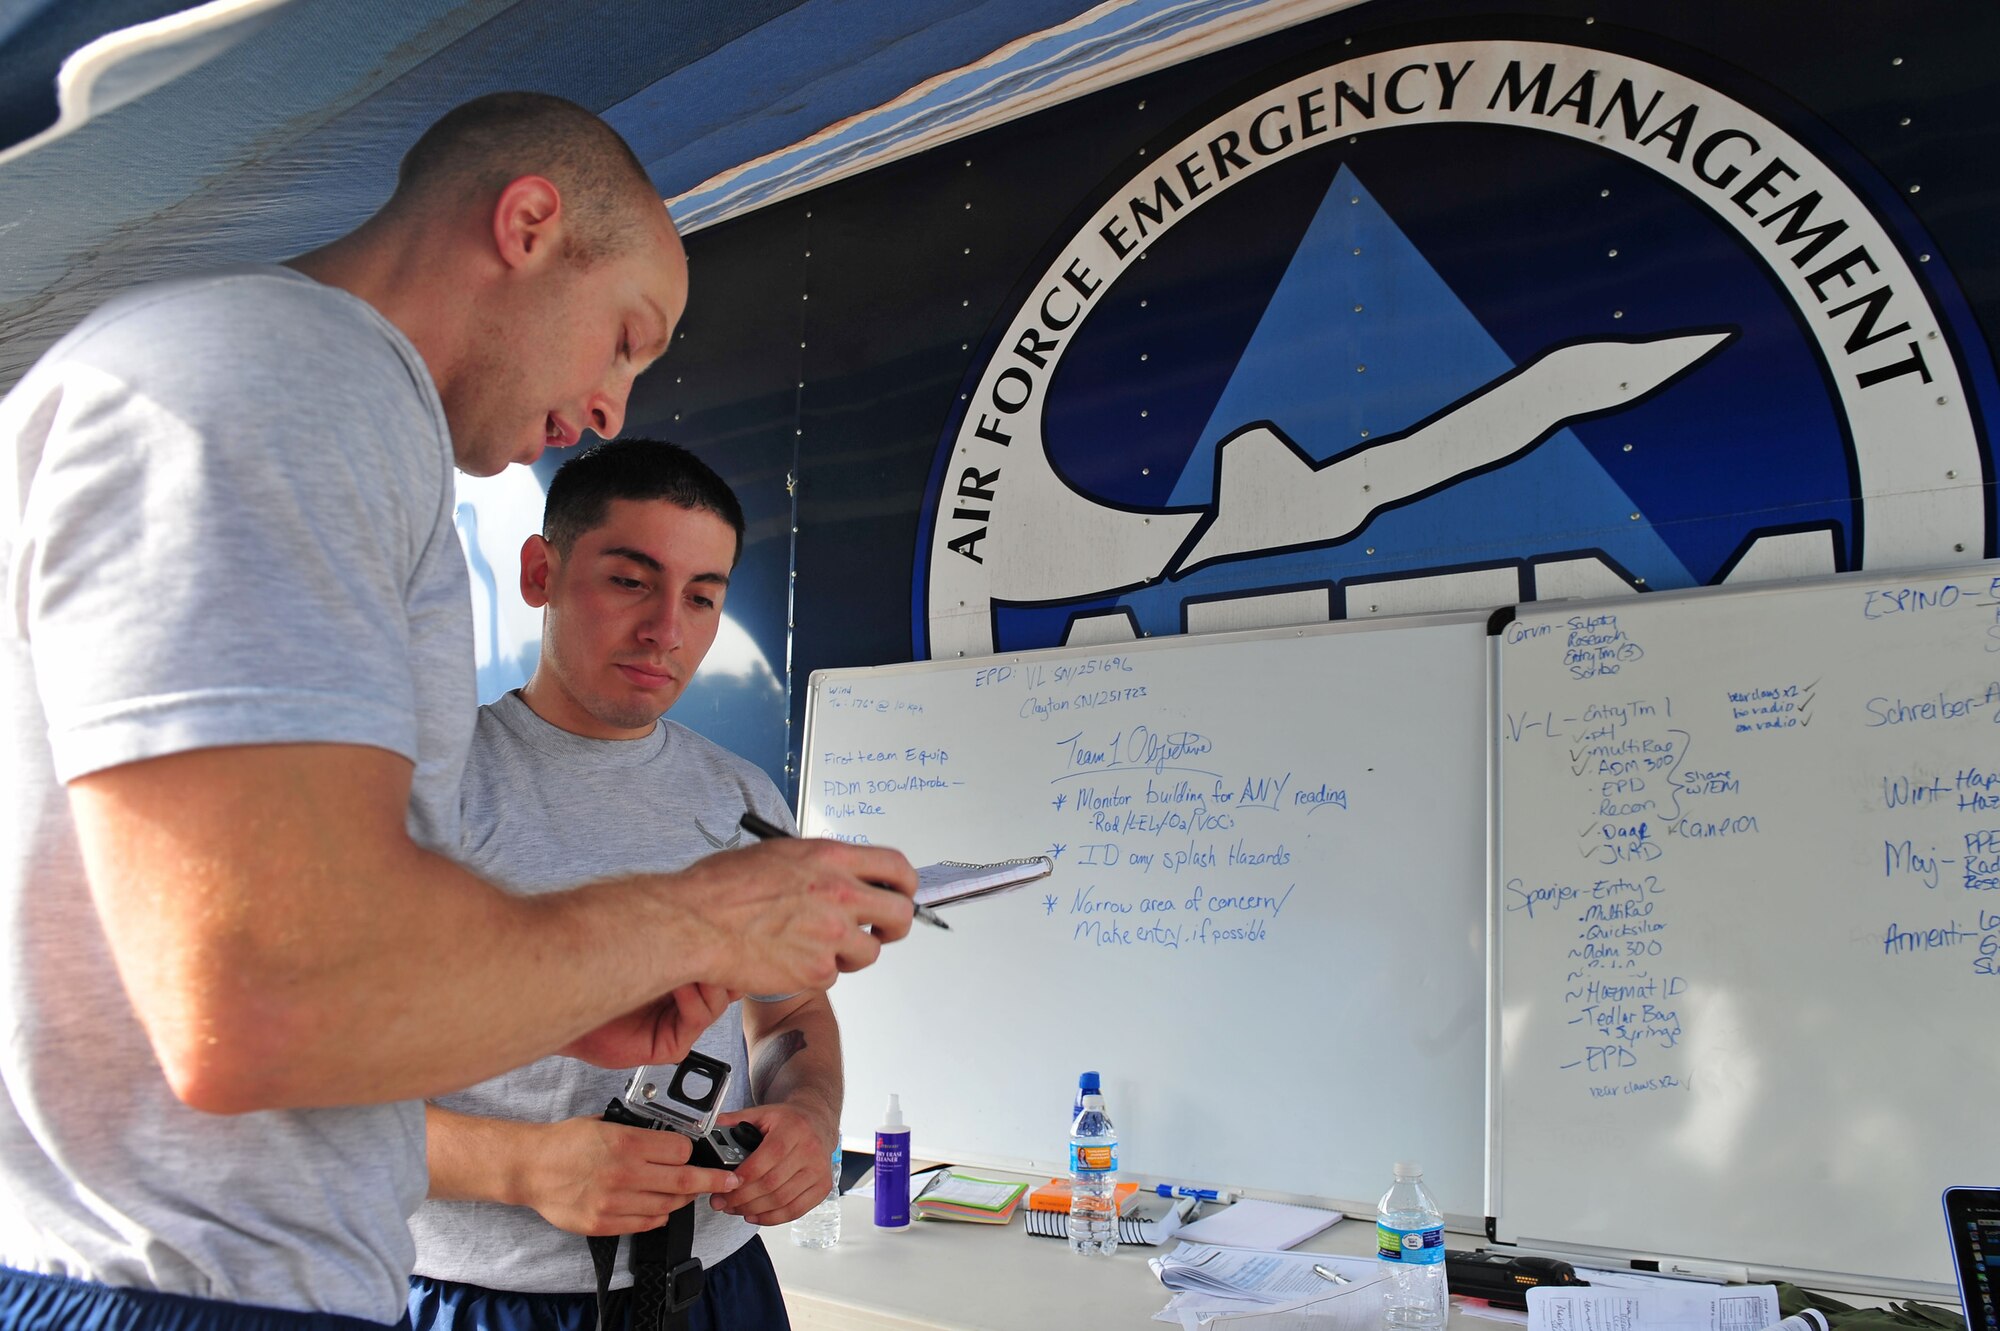 Senior Airmen James Corvin, left, and Elliseo Trujillo, 4th Aerospace Medicine Squadron bioenvironmental engineers, perform a health risk assessment during an integrated base emergency response capabilities training exercise, June 24, 2015, at Seymour Johnson Air Force Base, North Carolina. An HRA provides individuals with an evaluation of their health risks such as blood pressure, heart rate and overall health. (U.S. Air Force photo/Senior Airman John Nieves Camacho)